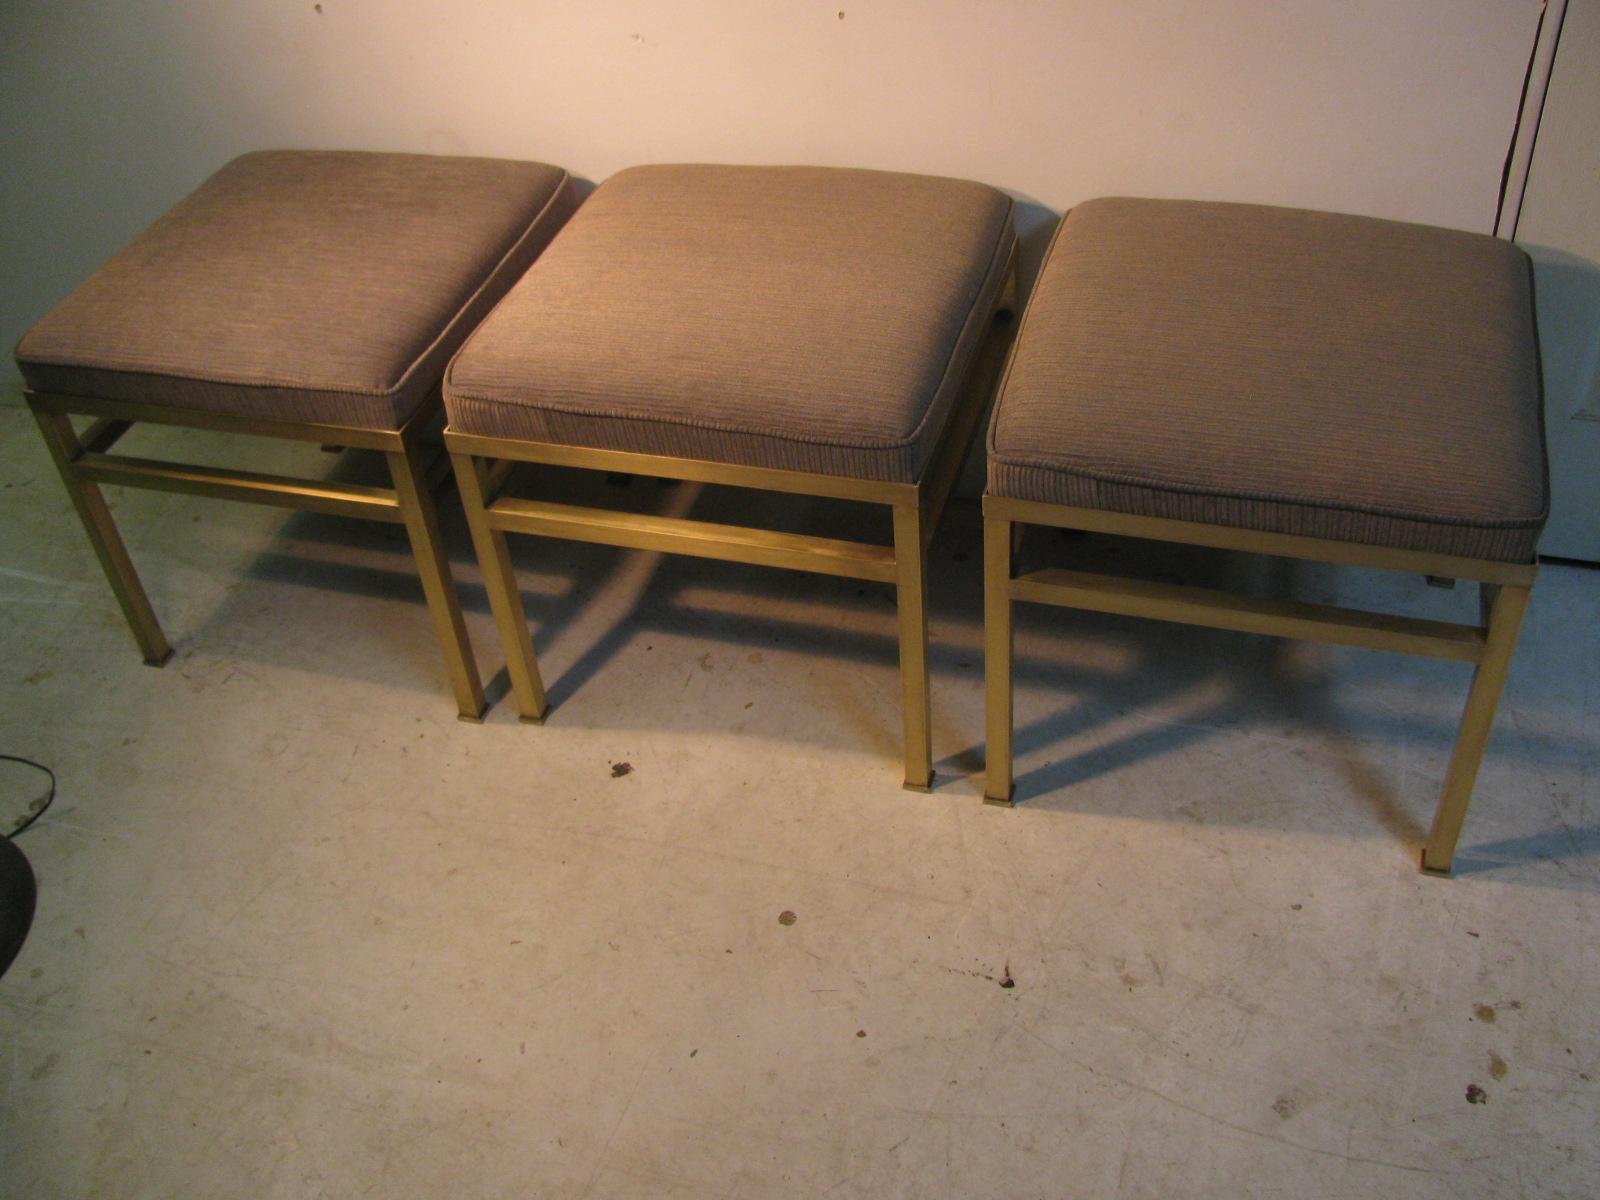 Mid-Century Modern Hollywood Regency Brass Ottoman Footstool In Good Condition For Sale In Port Jervis, NY